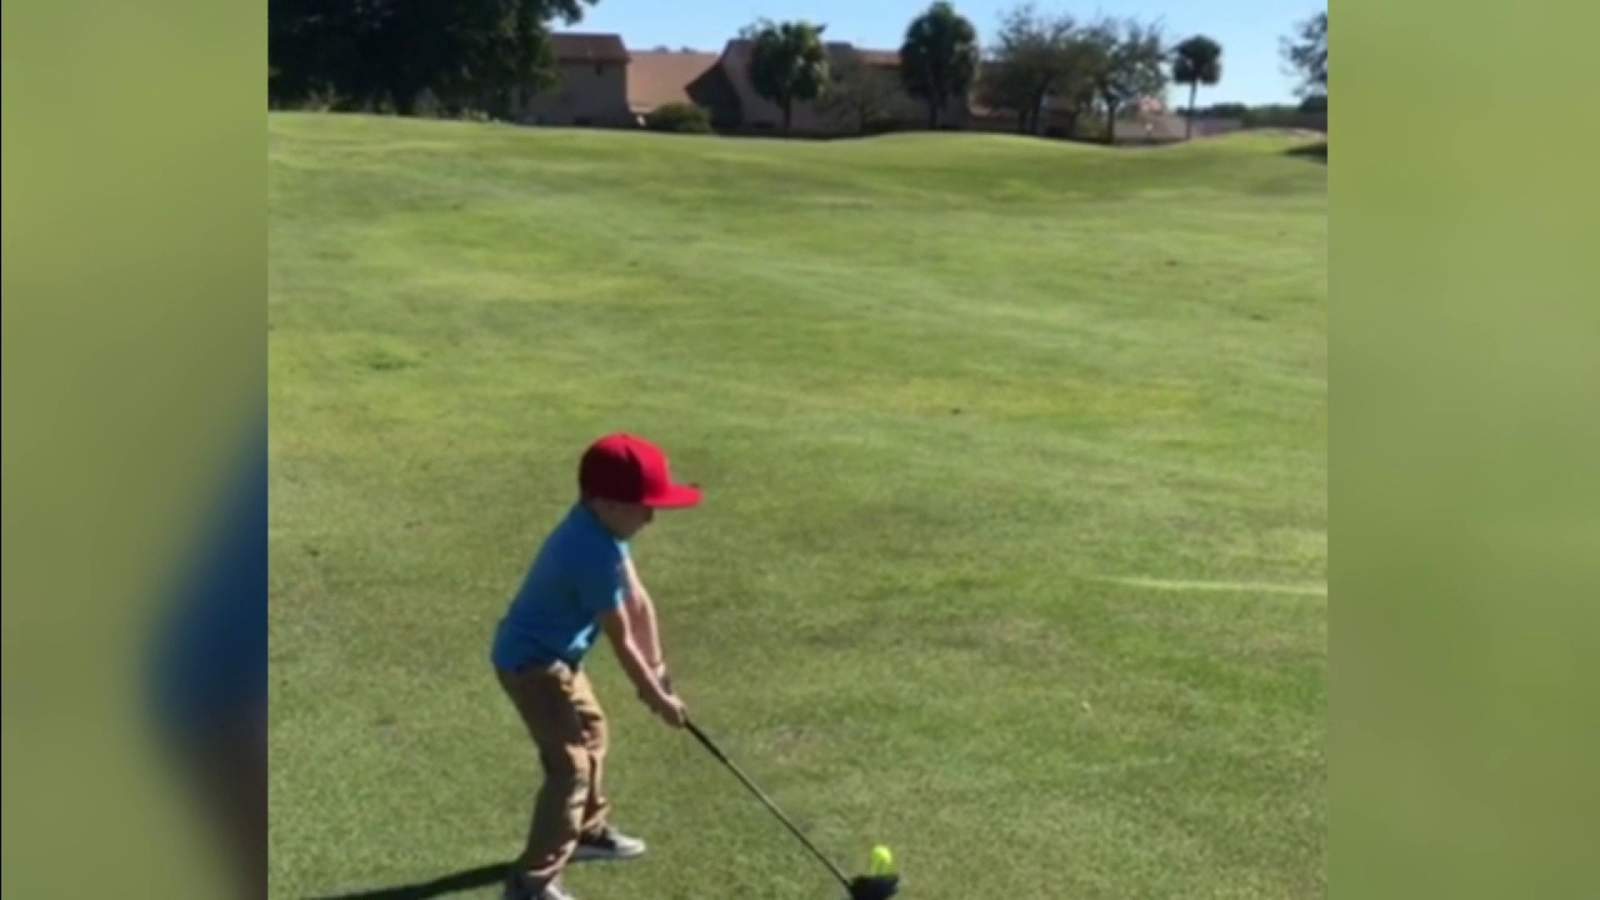 5-year-old Broward golfer building young reputation after hole in one